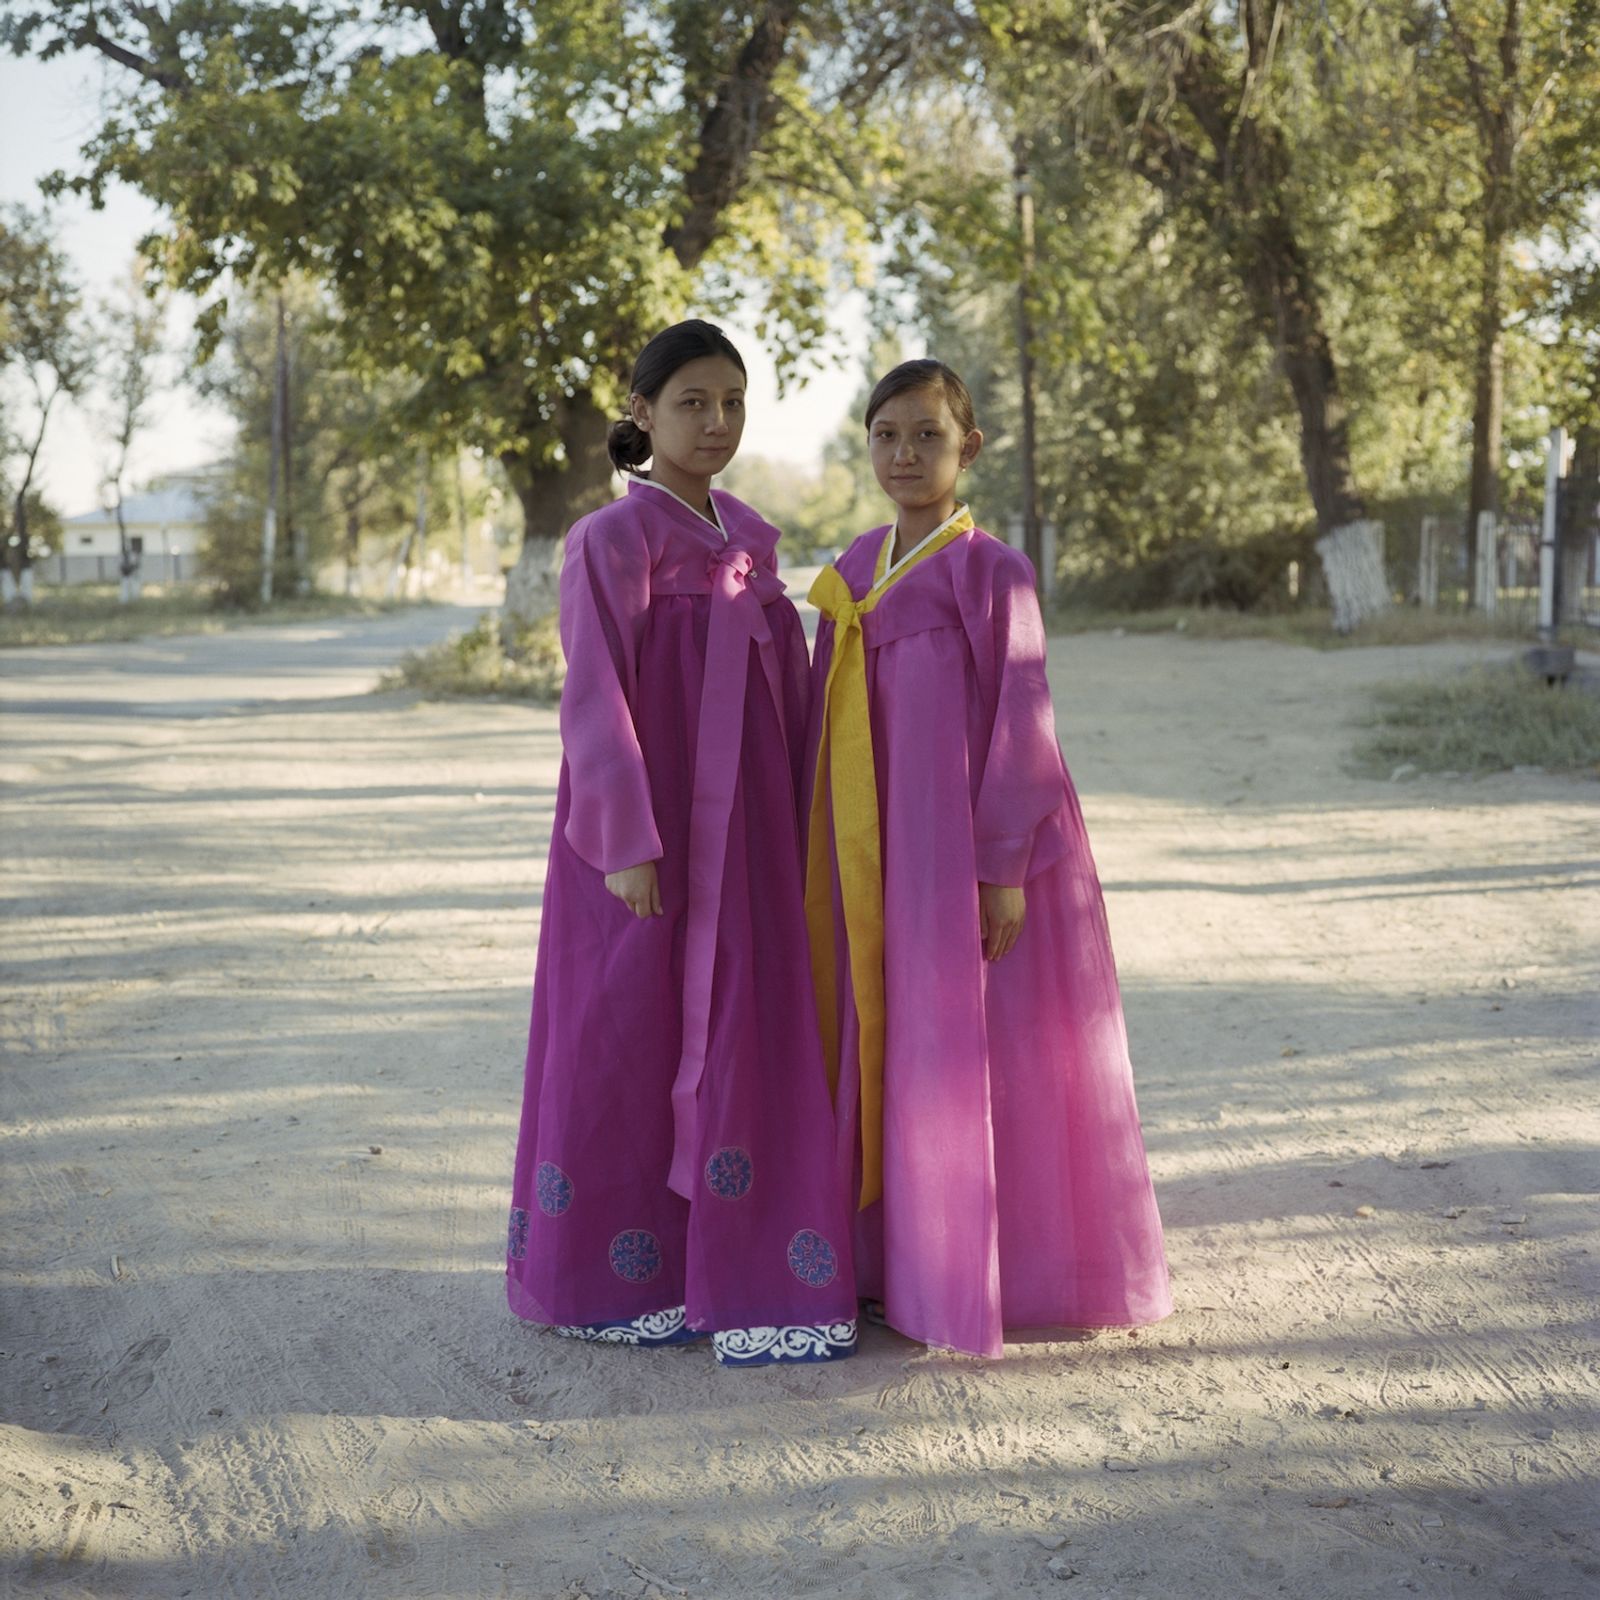 © Michael Vince Kim, from the series The Koreans of Kazakhstan